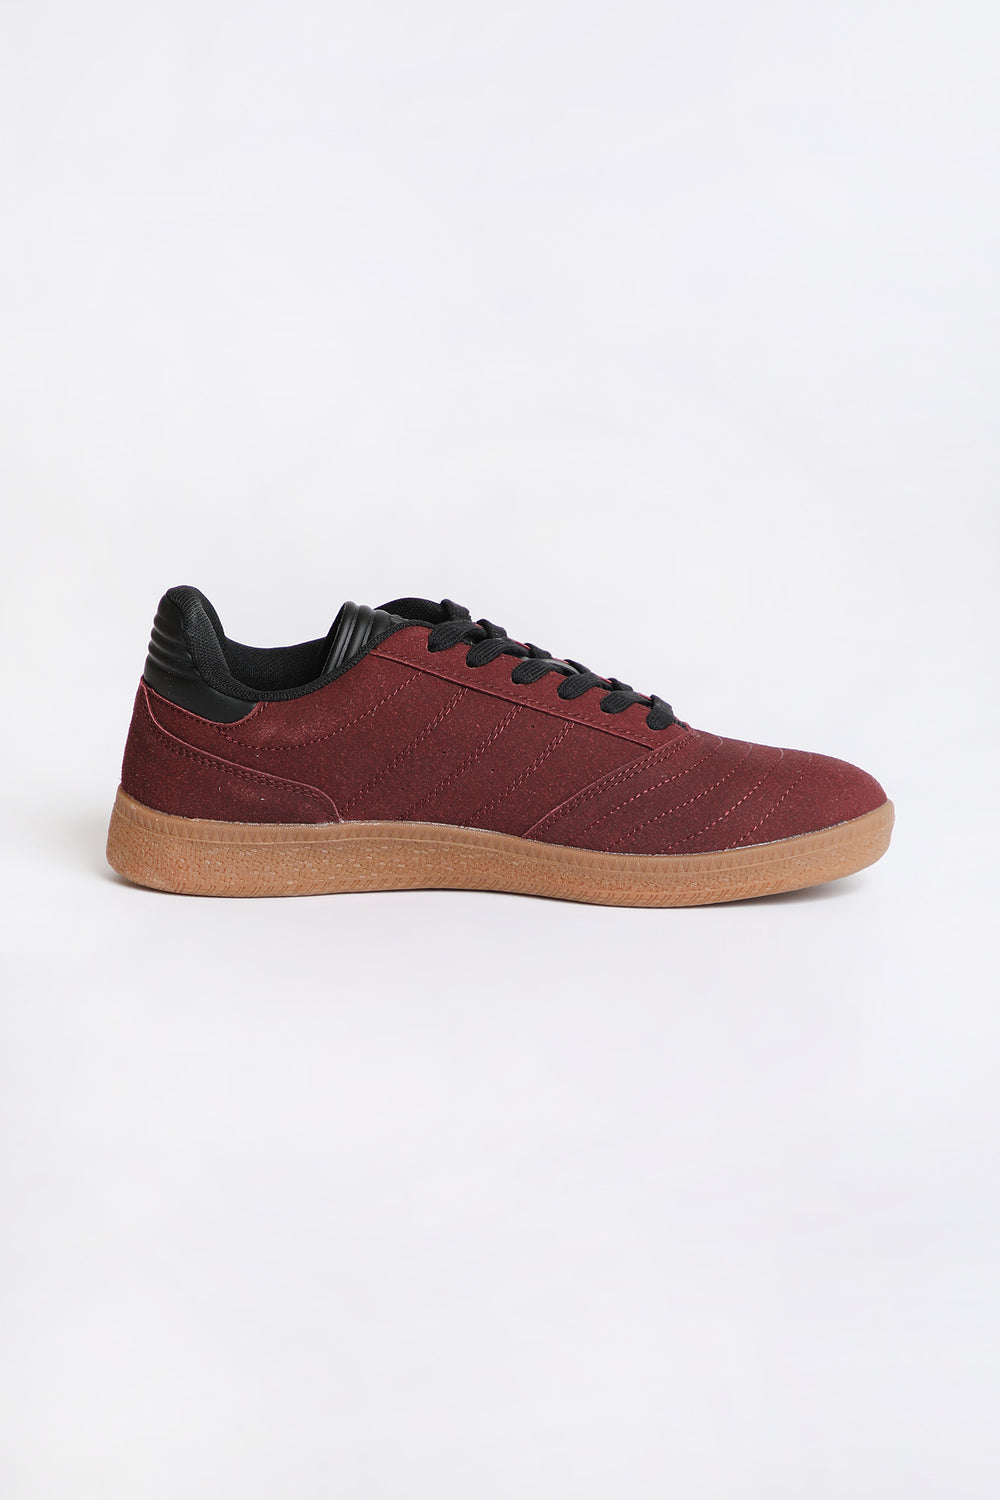 Chaussures en Daim Zoo York Homme Chaussures en Daim Zoo York Homme